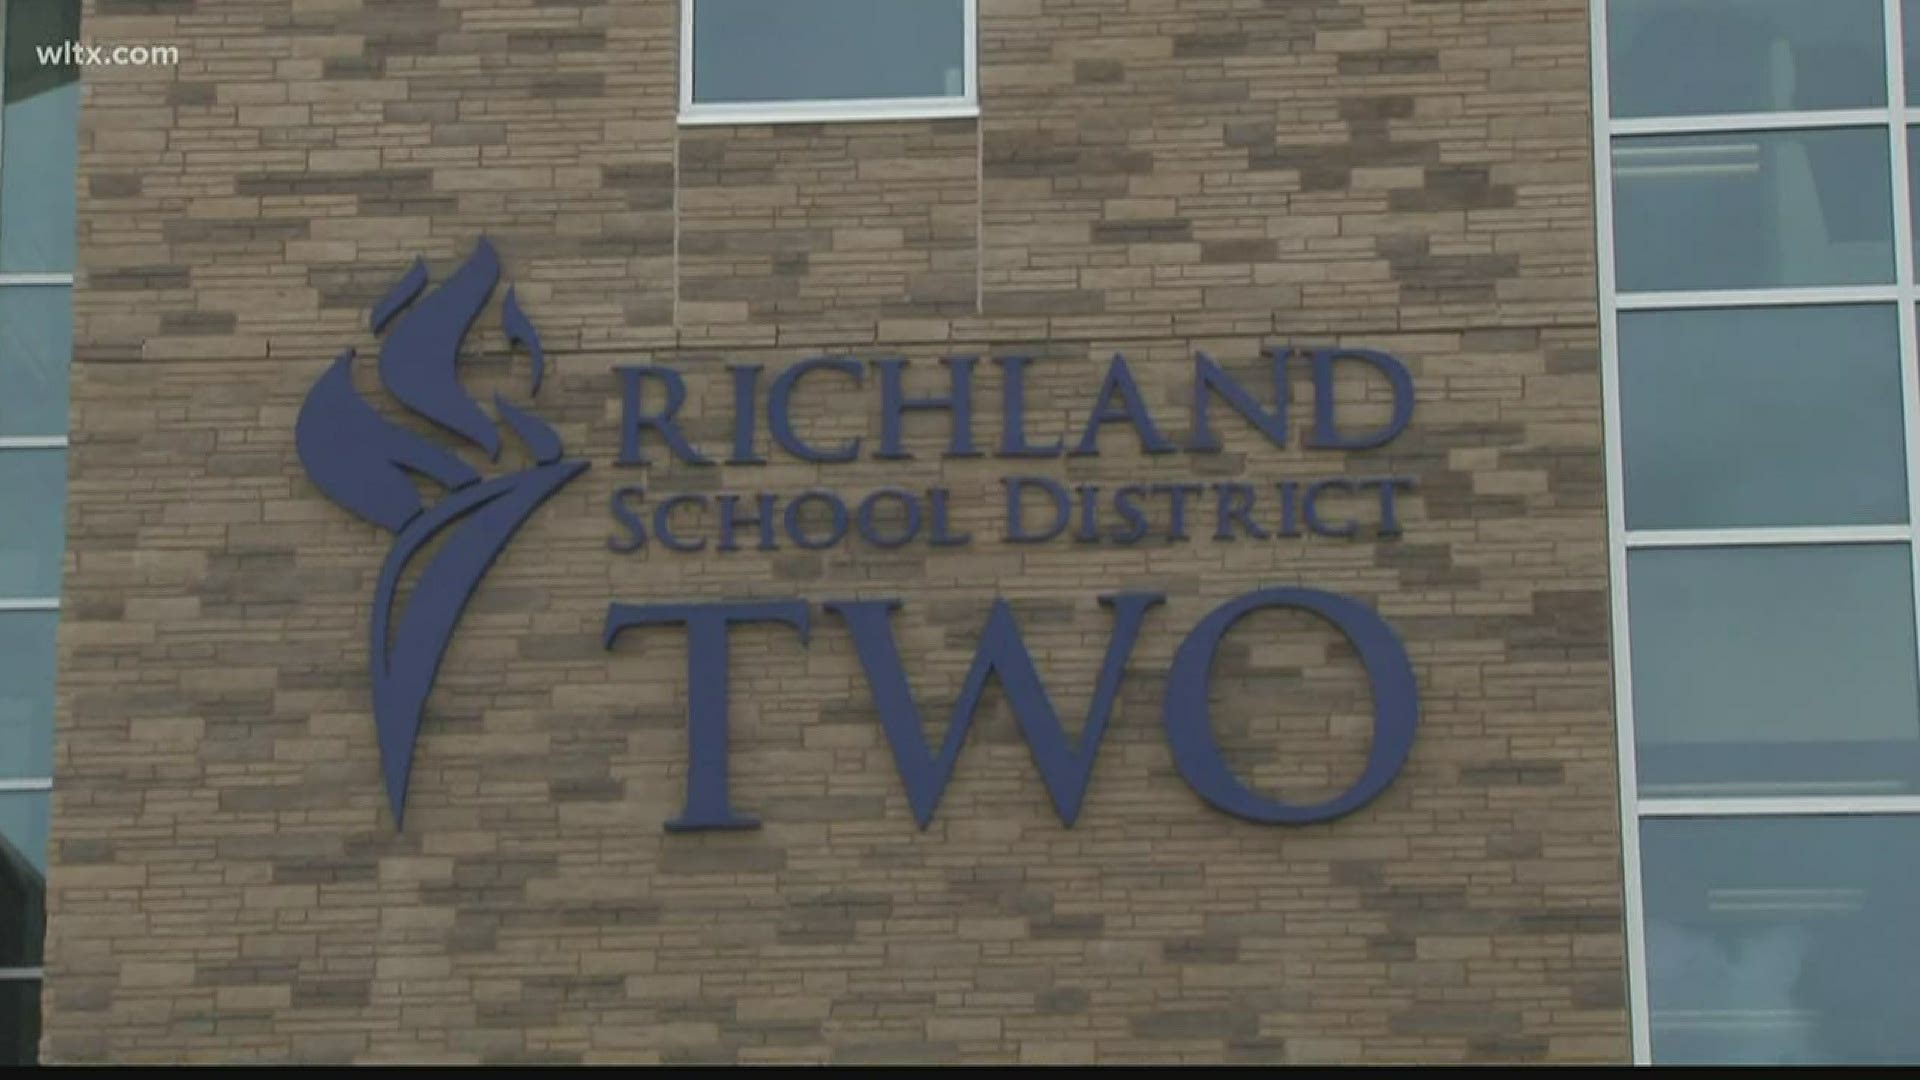 Despite Governor McMaster's call for school districts to provide an in-person option at the start of the school year, Richland Two continues their online plan.